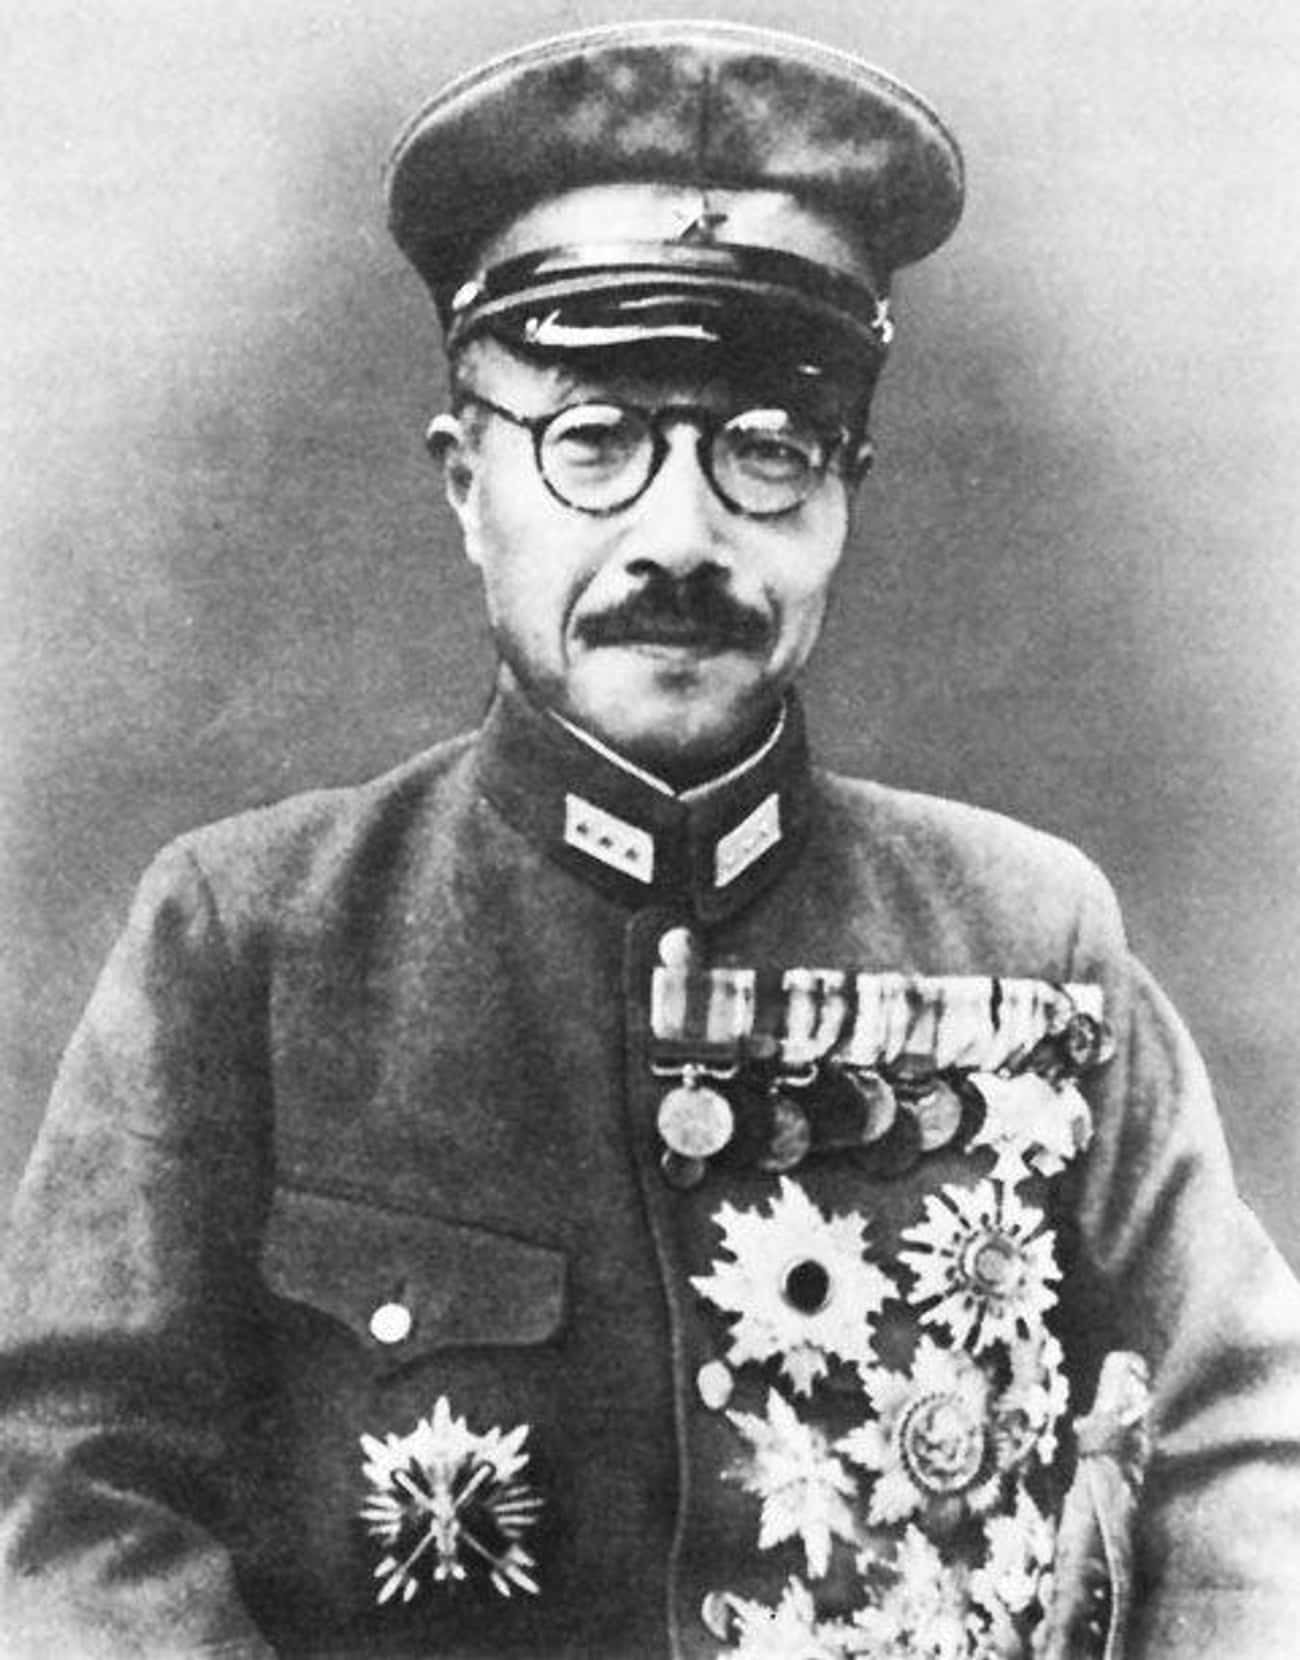 Hideki Tôjô Ordered The Attack On Pearl Harbor And Was Sentenced To Death